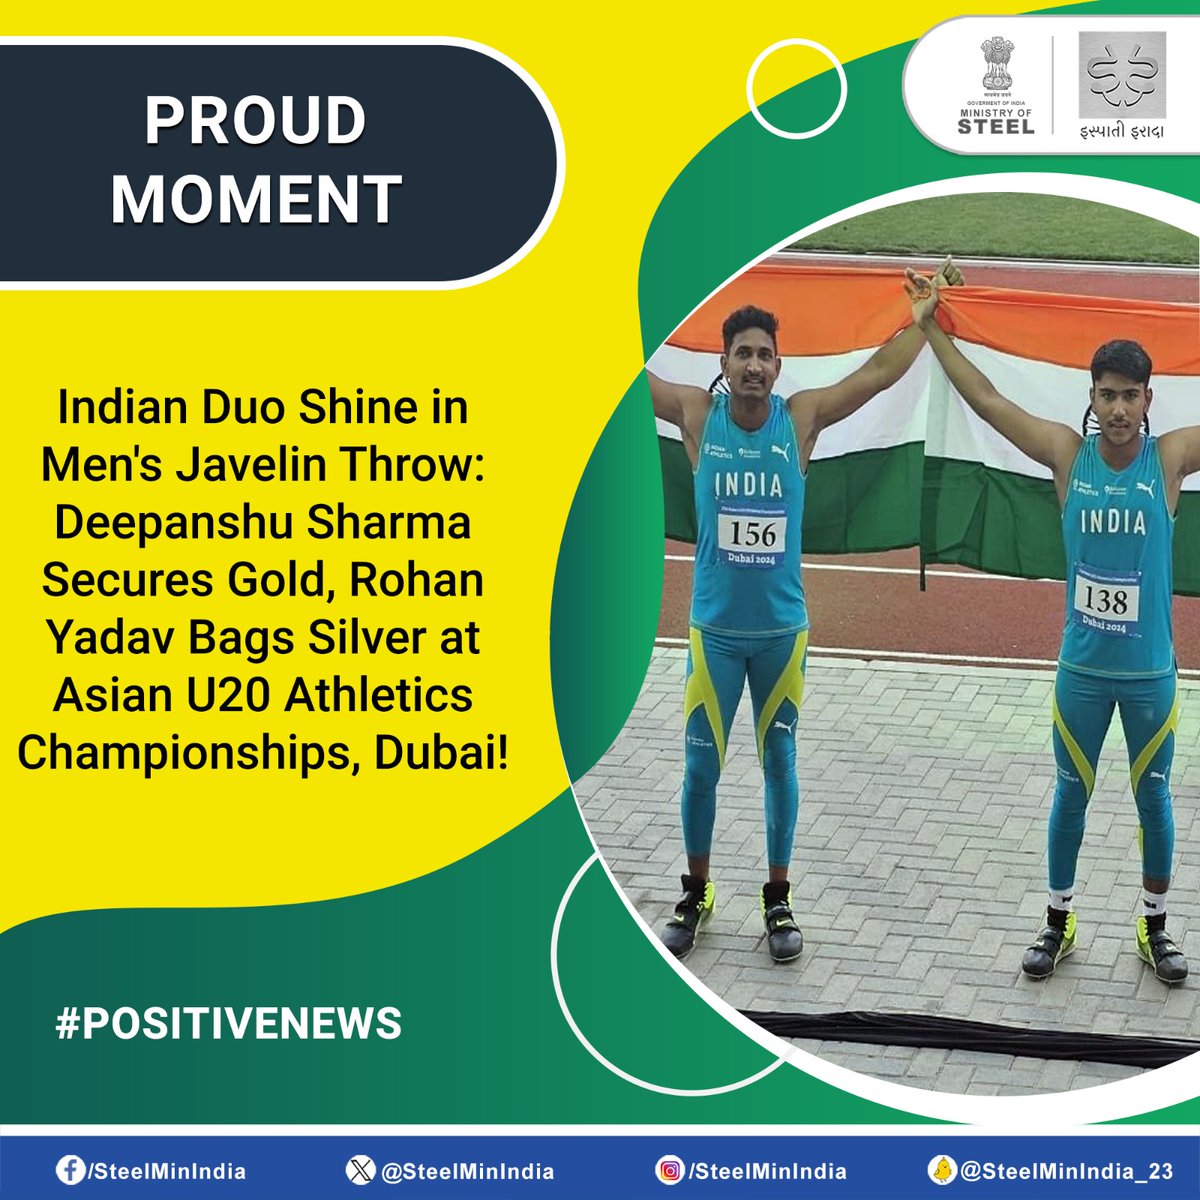 #DeepanshuSharma claimed #gold with a best throw of 70.29 meters, while #RohanYadav secured #silver with a best throw of 70.03 meters at the Asian U20 Athletics Championships. Congratulations to both for their outstanding achievement!🥇🥈🇮🇳

#PositiveNews #AsianU20 #Dubai